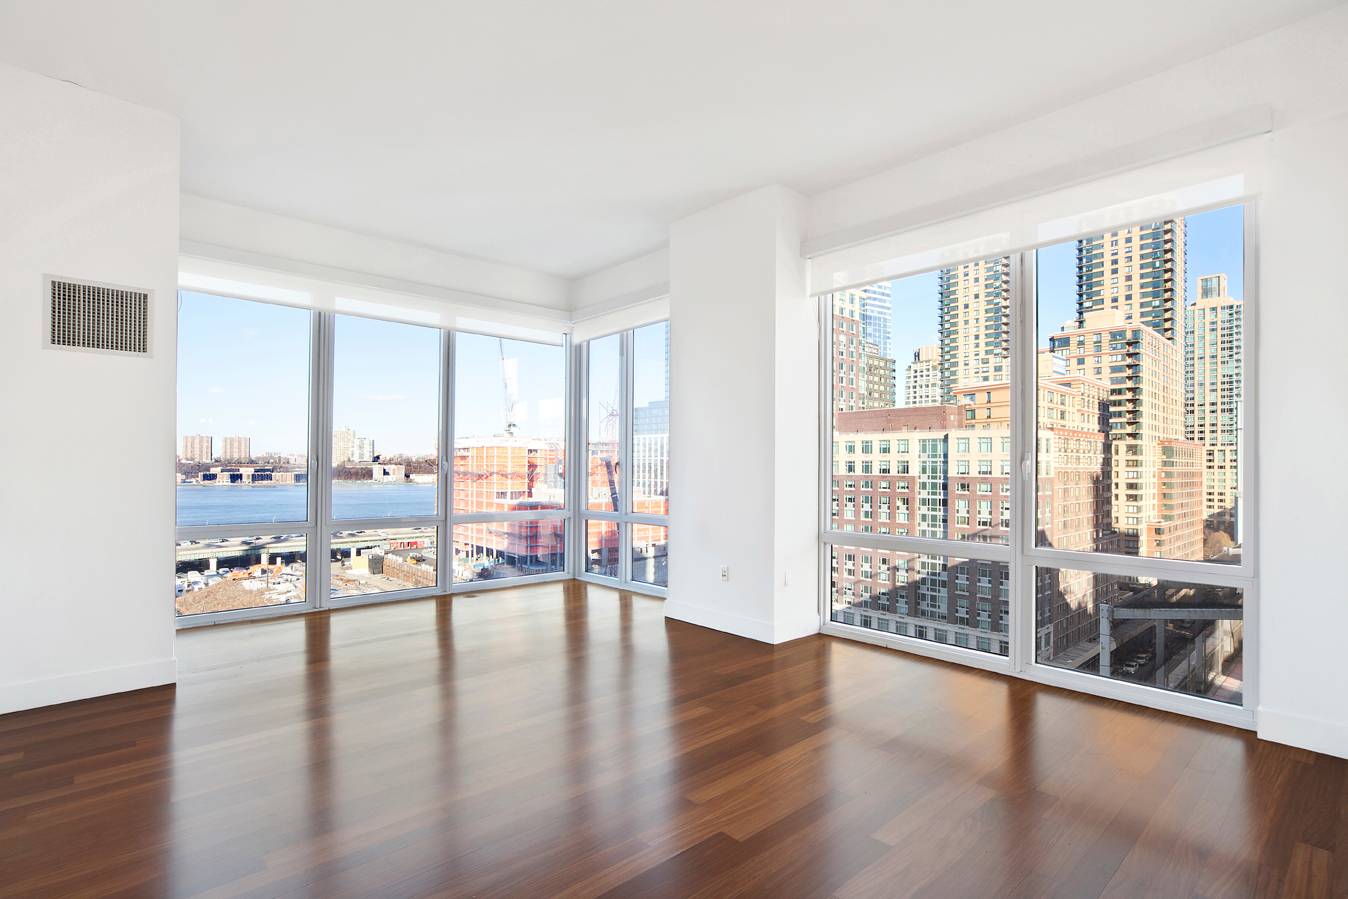 Luxury converted 2BR/1.5 bath corner apartment boasts river views with north, east and western exposure with floor-to-ceiling windows.